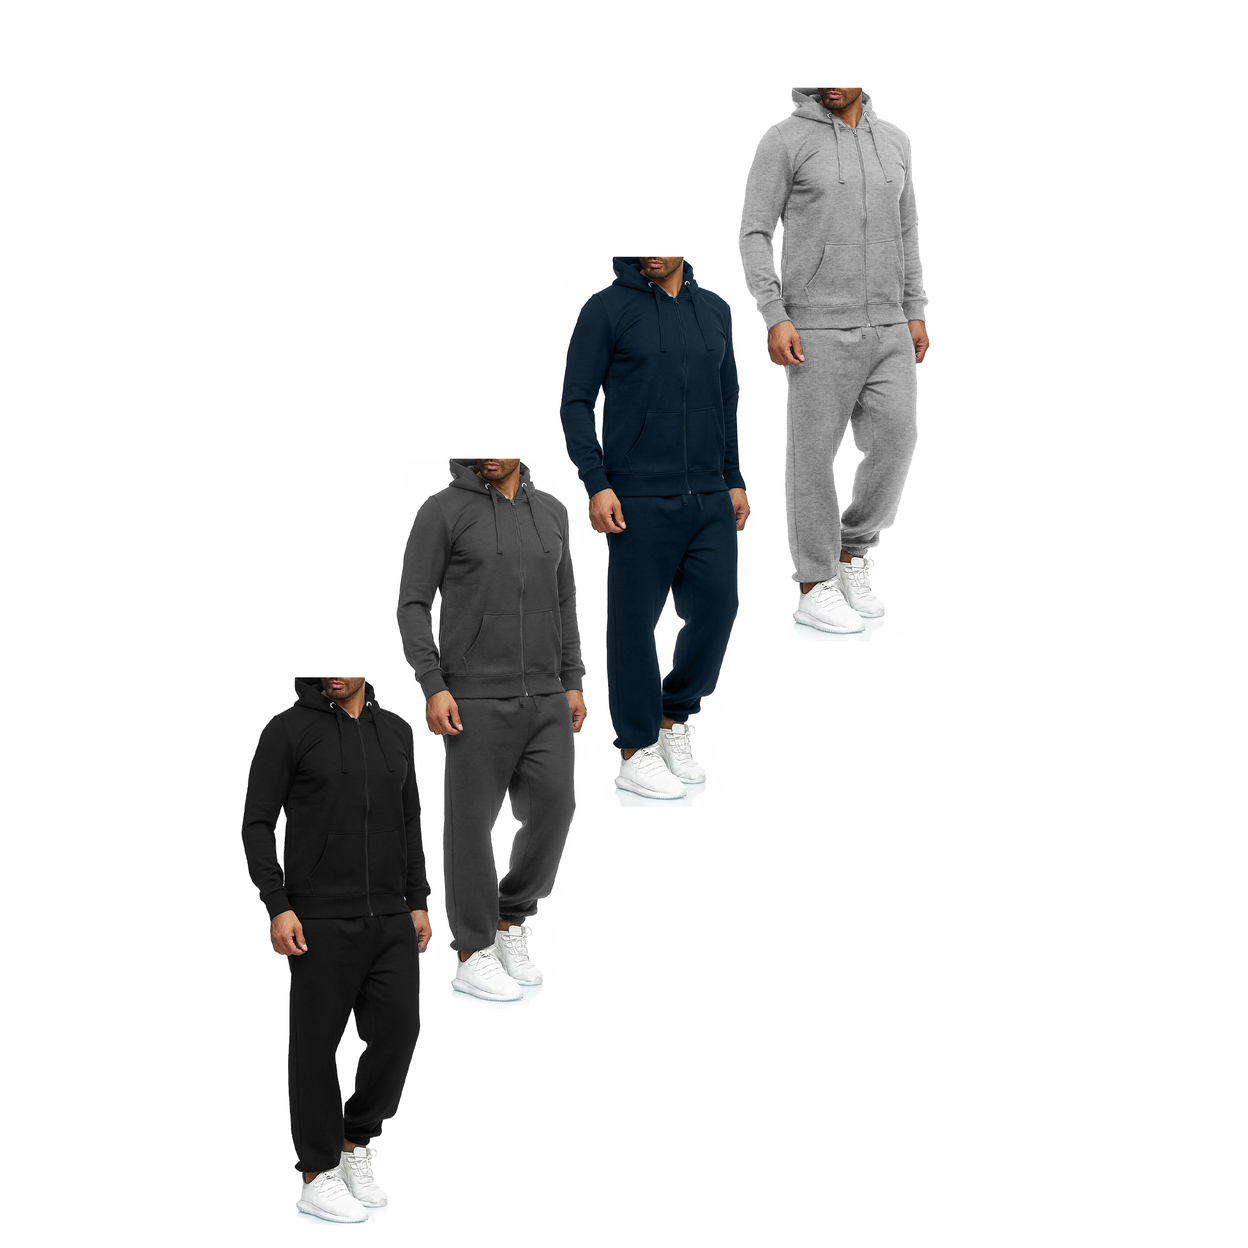 Multi-Pack: Men's Casual Big & Tall Athletic Active Winter Warm Fleece Lined Full Zip Tracksuit Jogger Set - Charcoal, 2-pack, Small